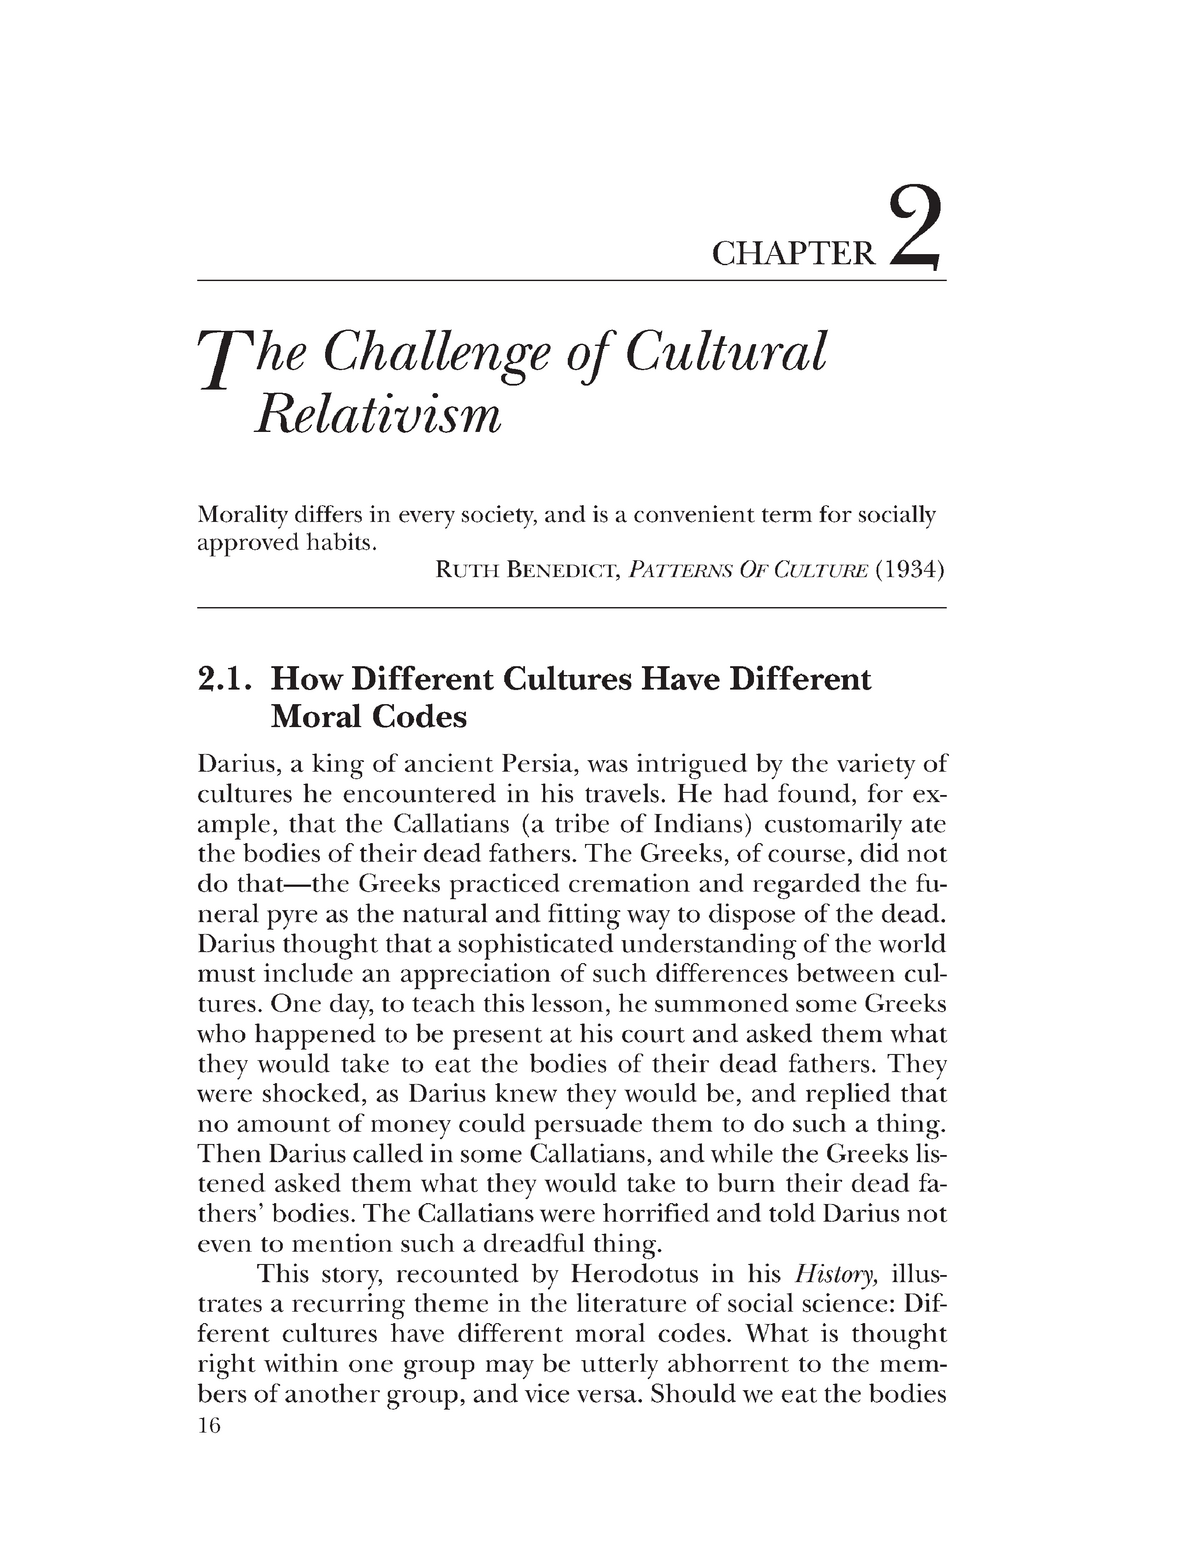 essay about cultural relativism in our society brainly